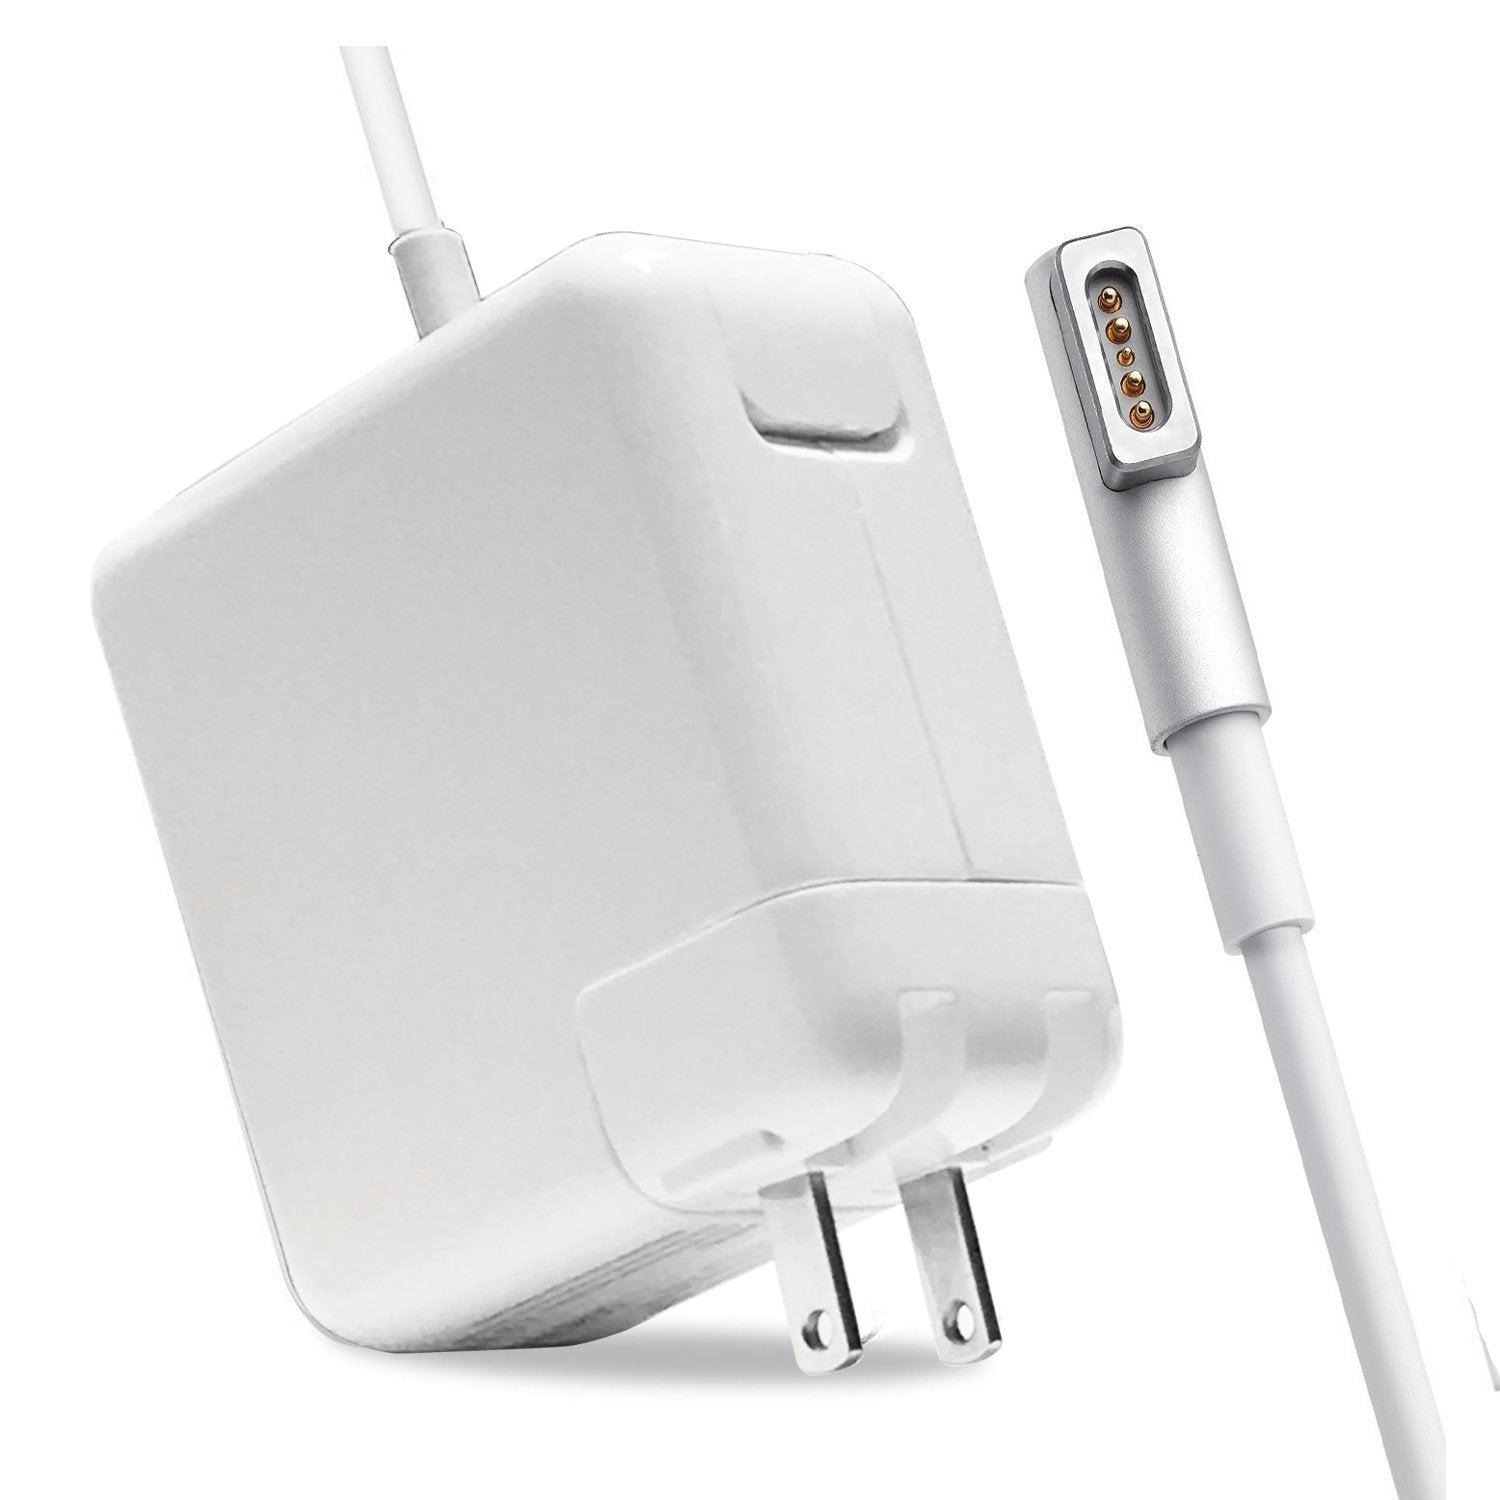 apple a1181 macbook charger